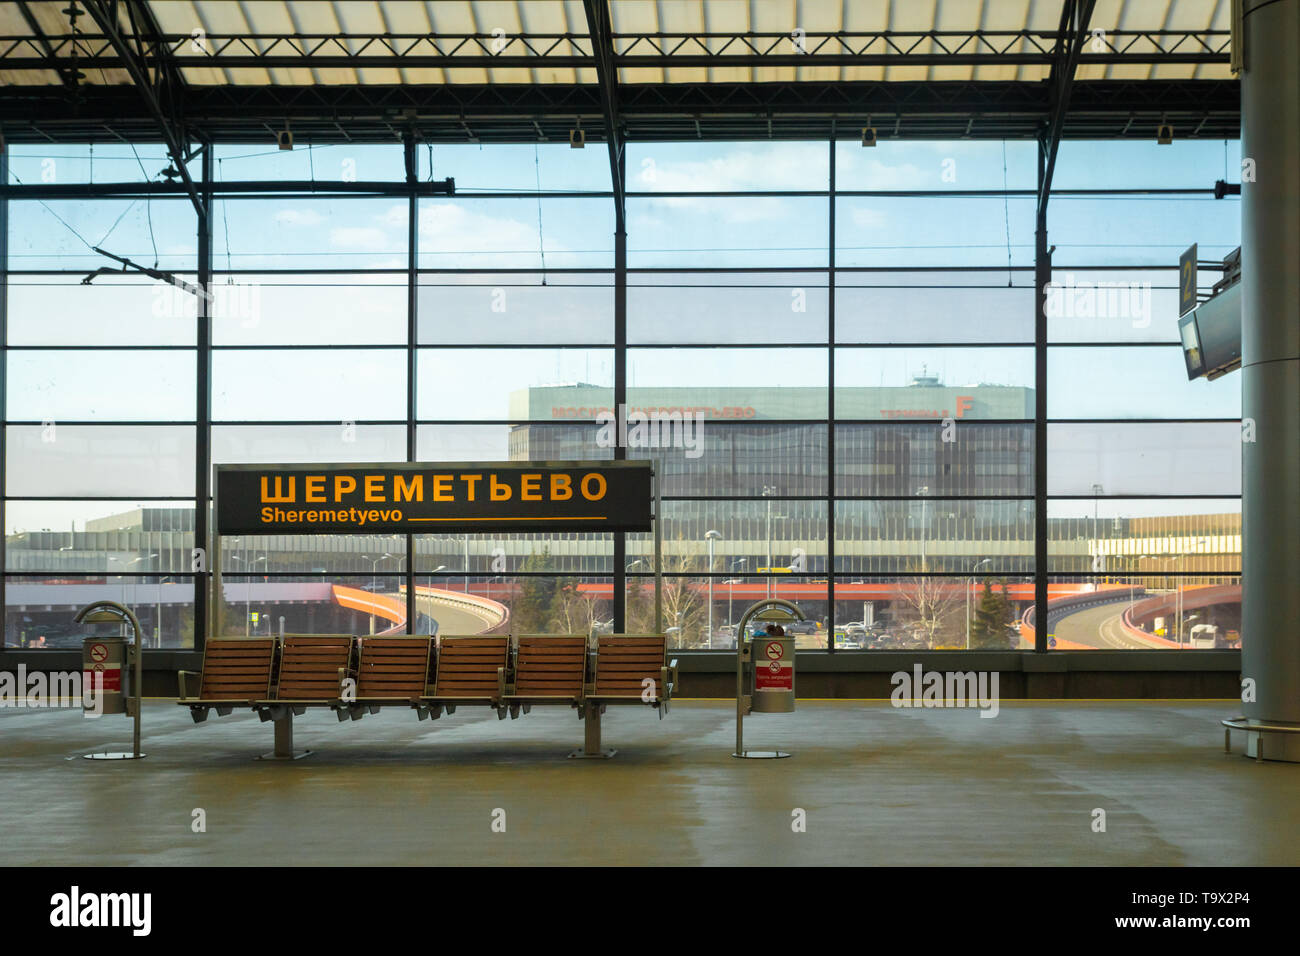 Moscou, Russie - Mai 2019 : plate-forme d'Aeroexpress Moscow Sheremetyevo airport station. Aéroexpress Ltd. est l'exploitant Banque D'Images